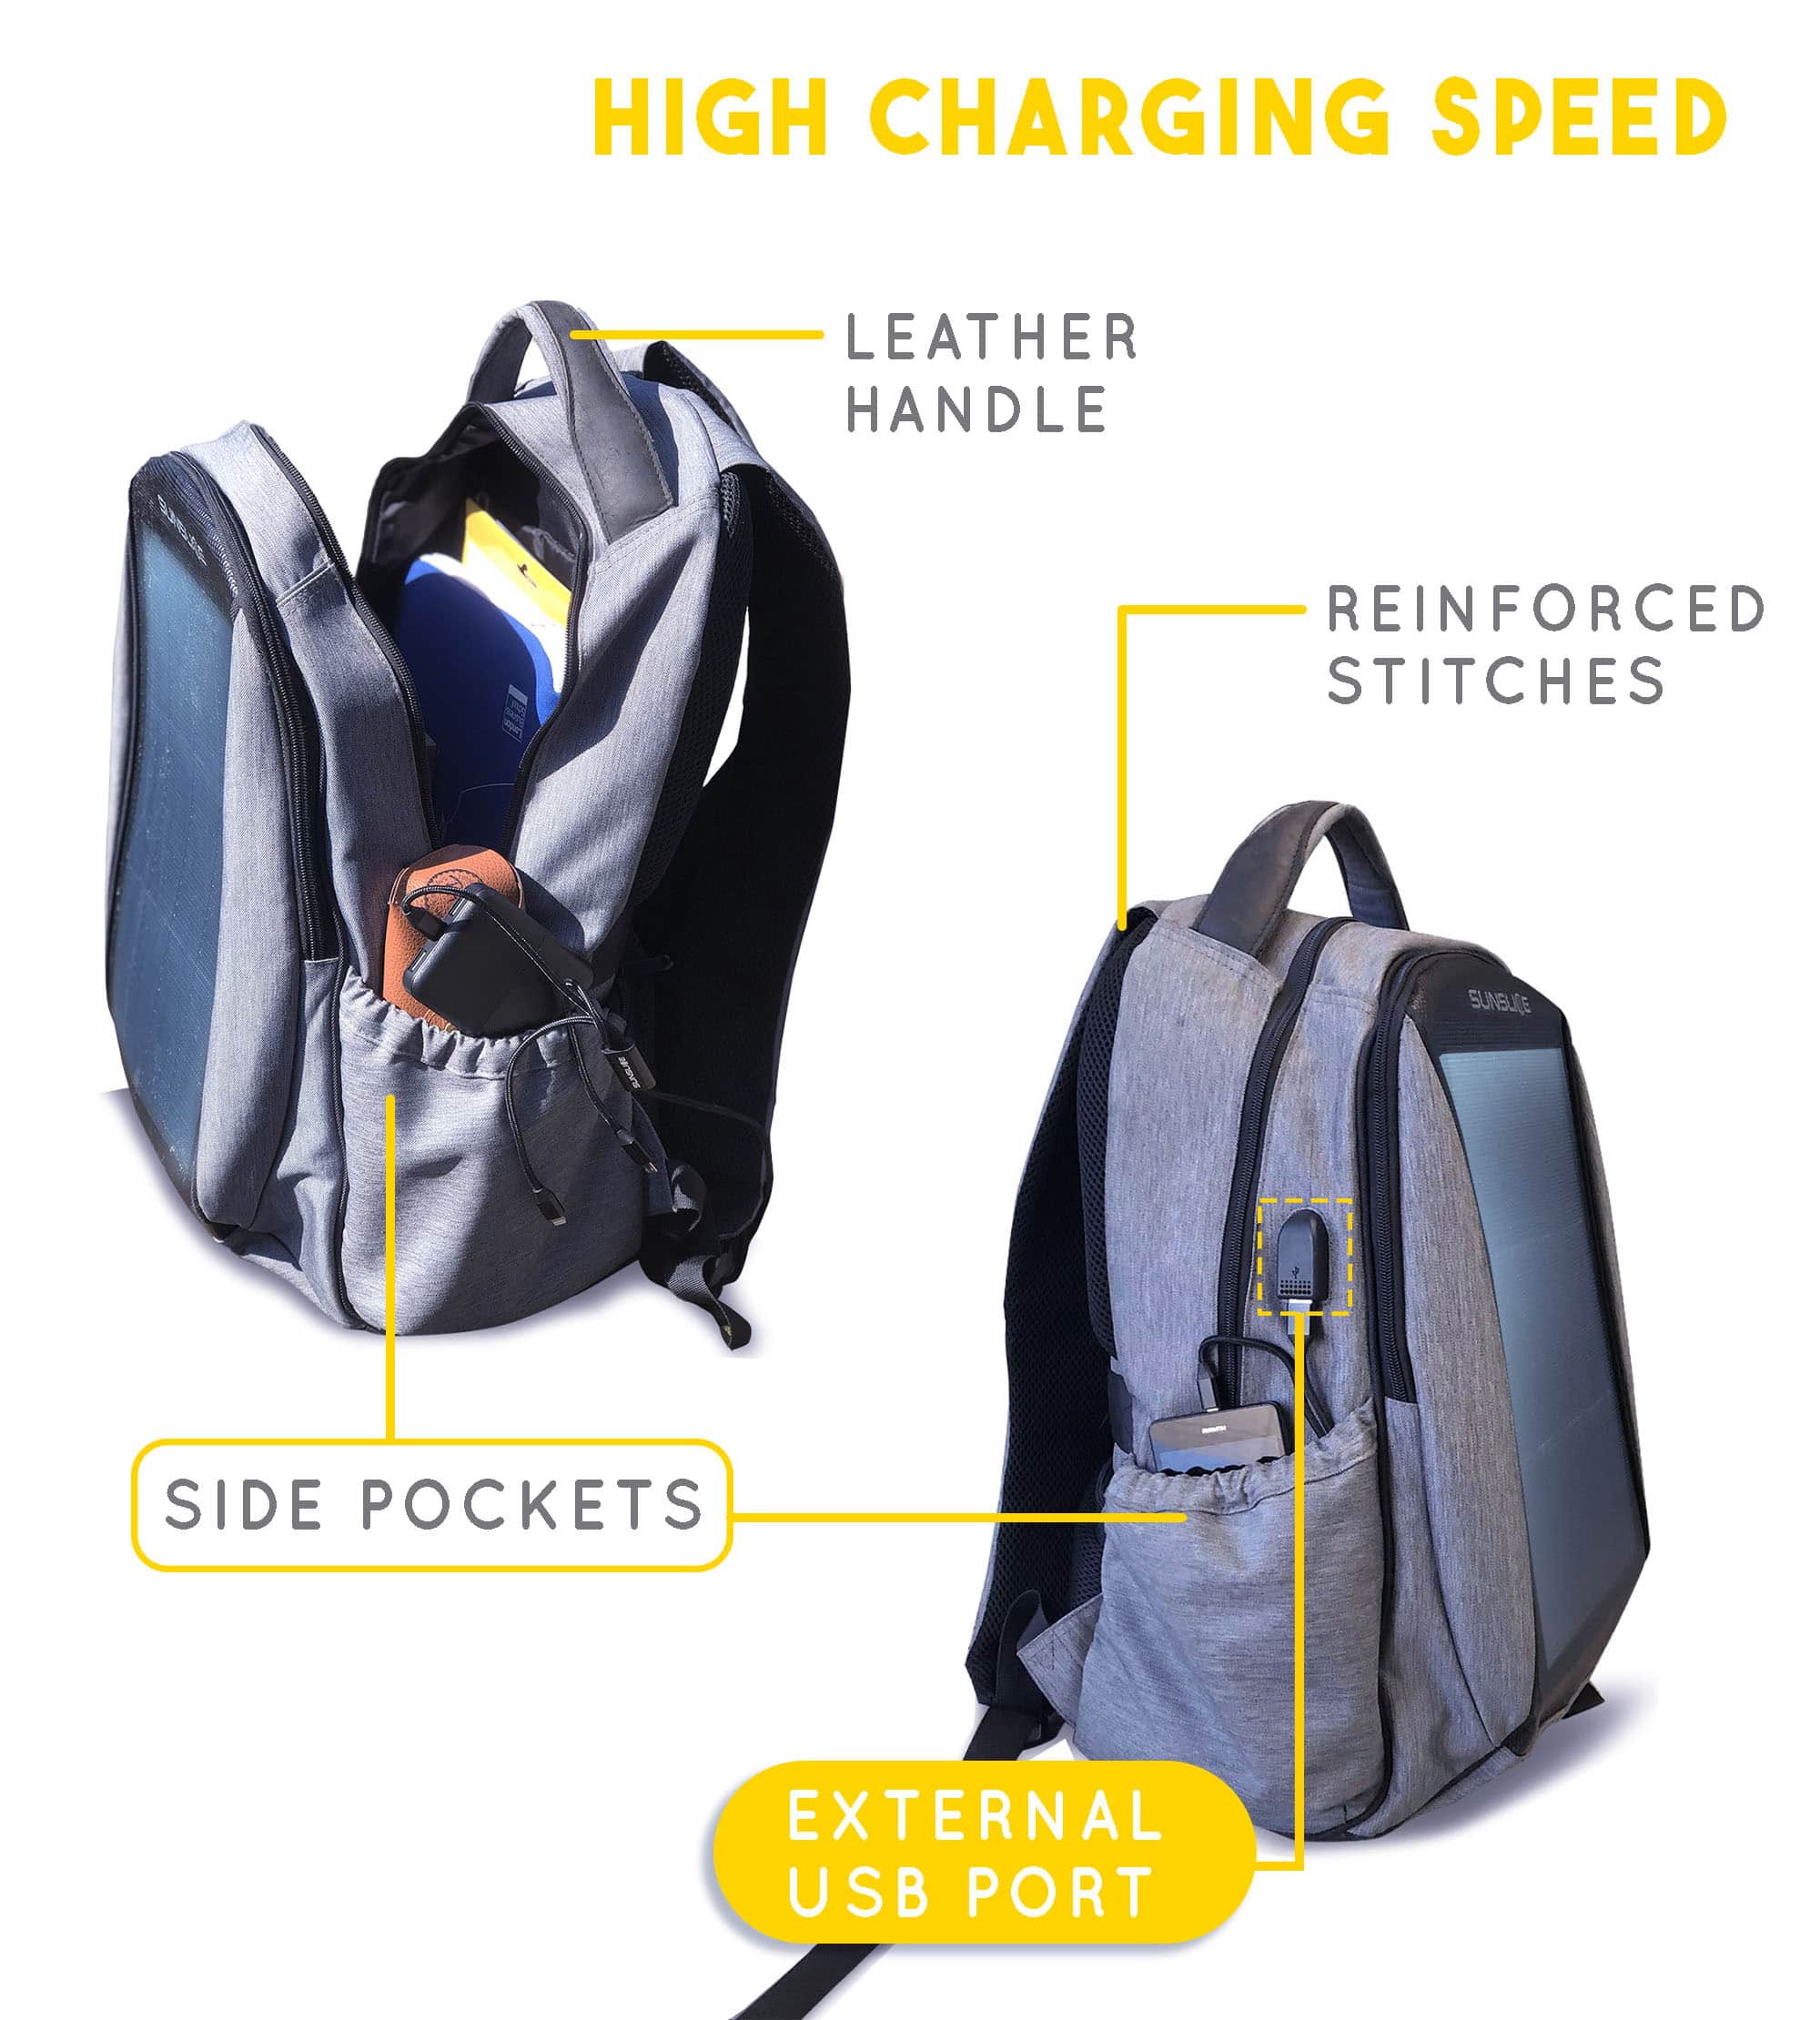 solar backpack with a external usb port, a side pockets, a leather handle and reiforced stitches for solid backpack